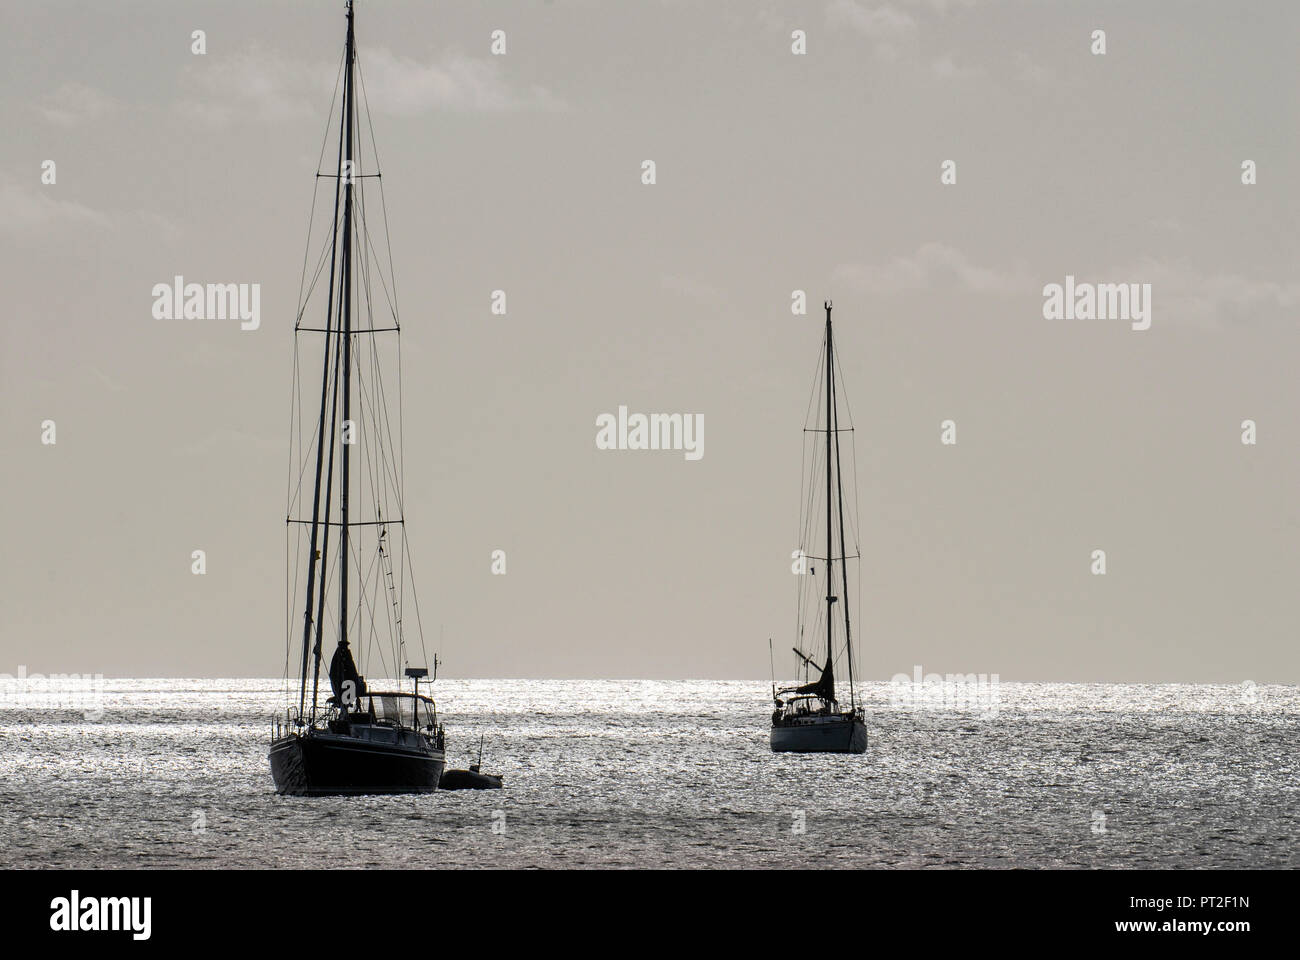 Sailing boats in Rodney Bay, St. Lucia Stock Photo